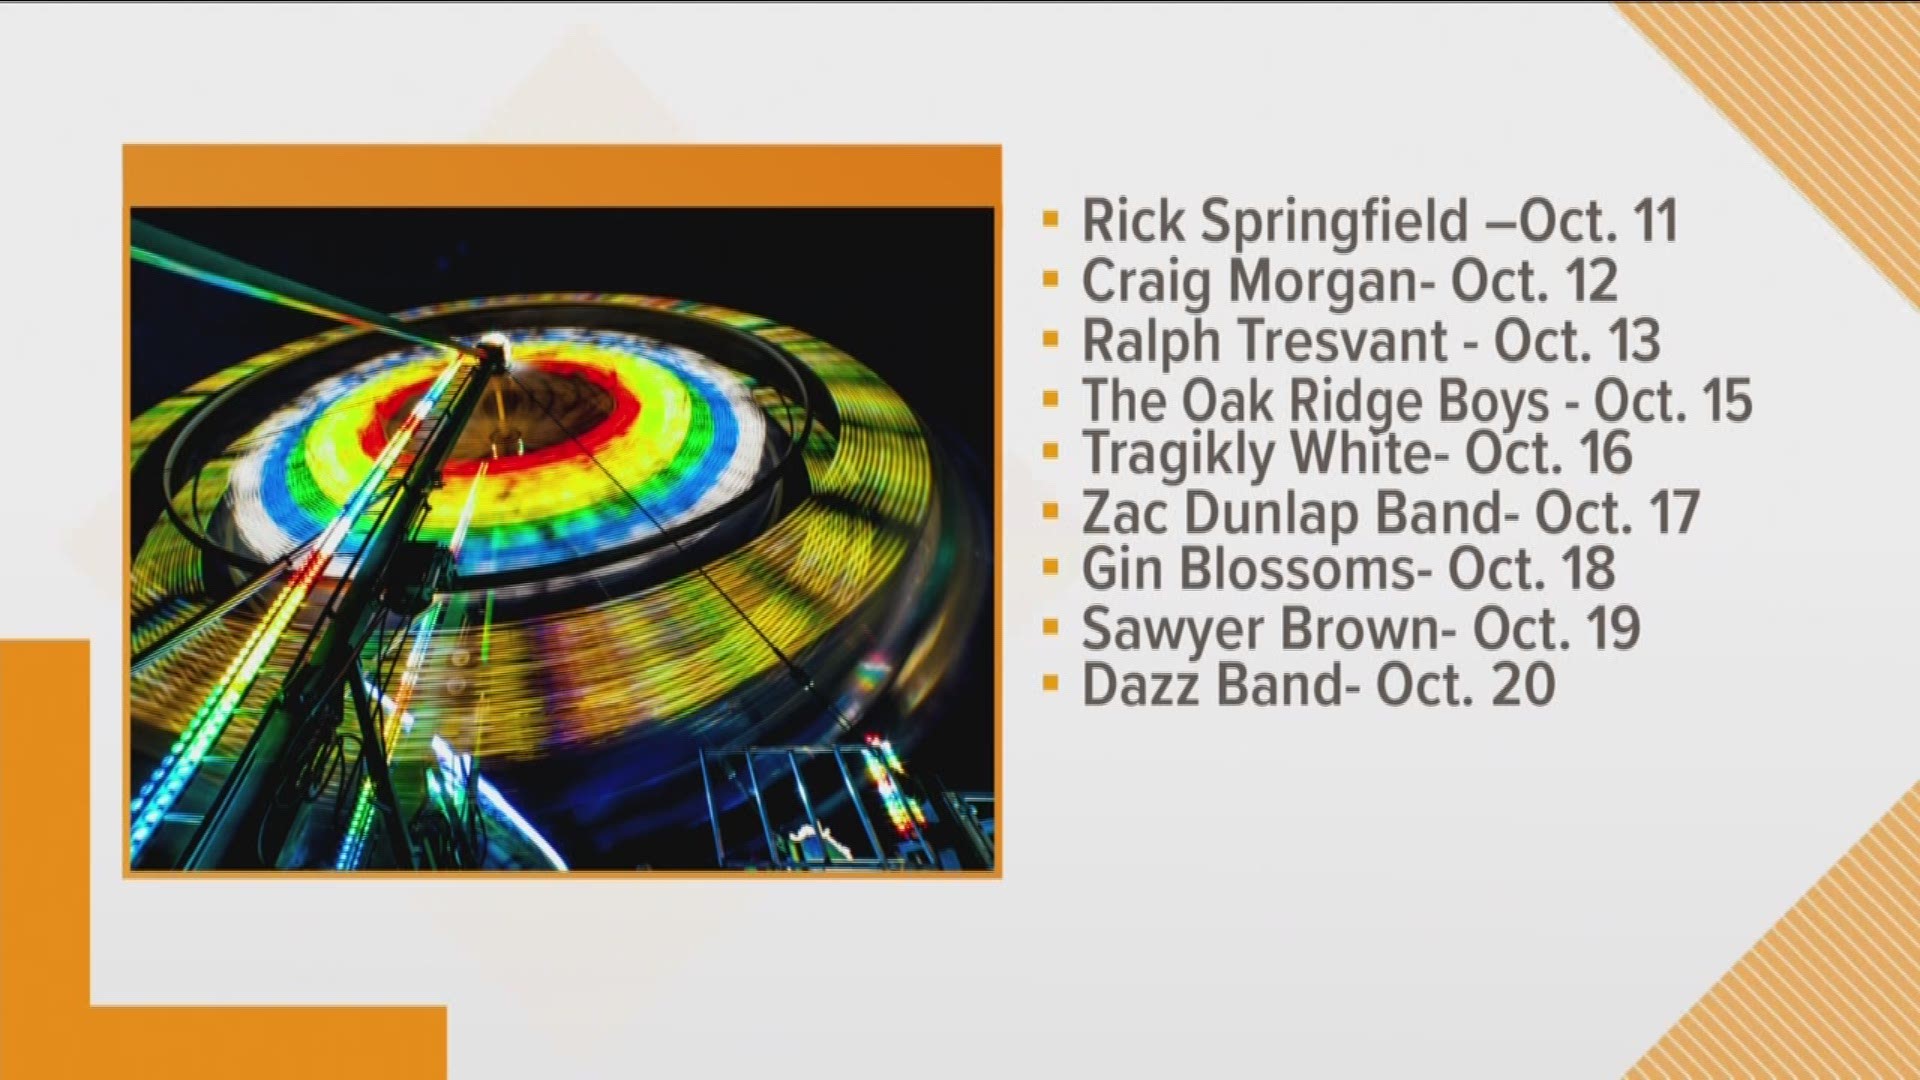 The full list of concerts is on THV11.com right now and in our THV11 app.